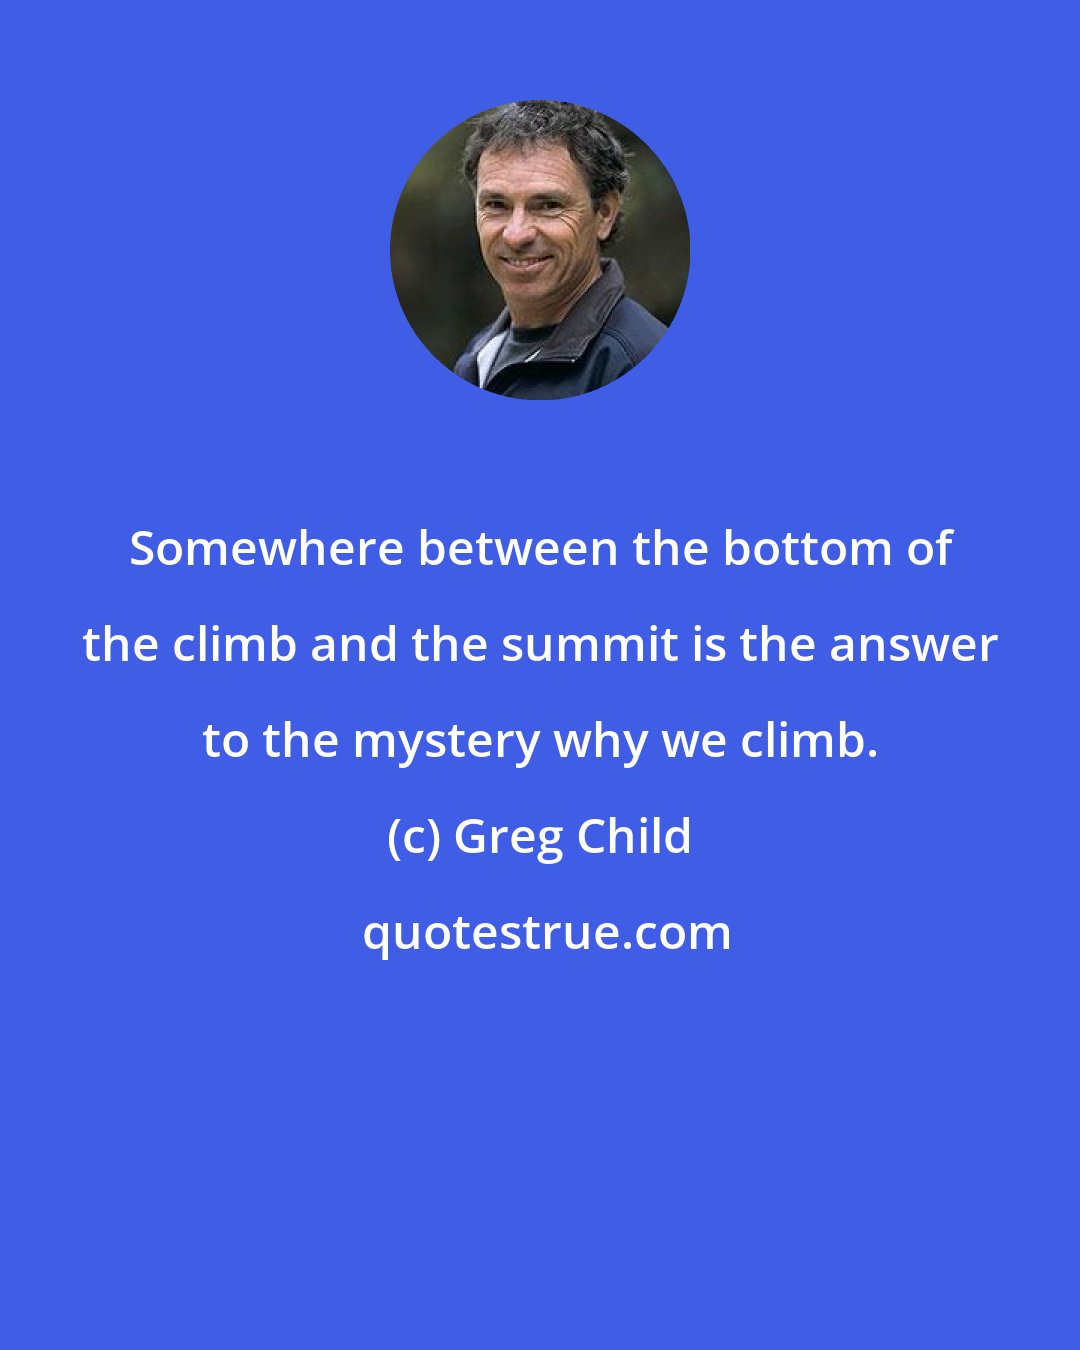 Greg Child: Somewhere between the bottom of the climb and the summit is the answer to the mystery why we climb.